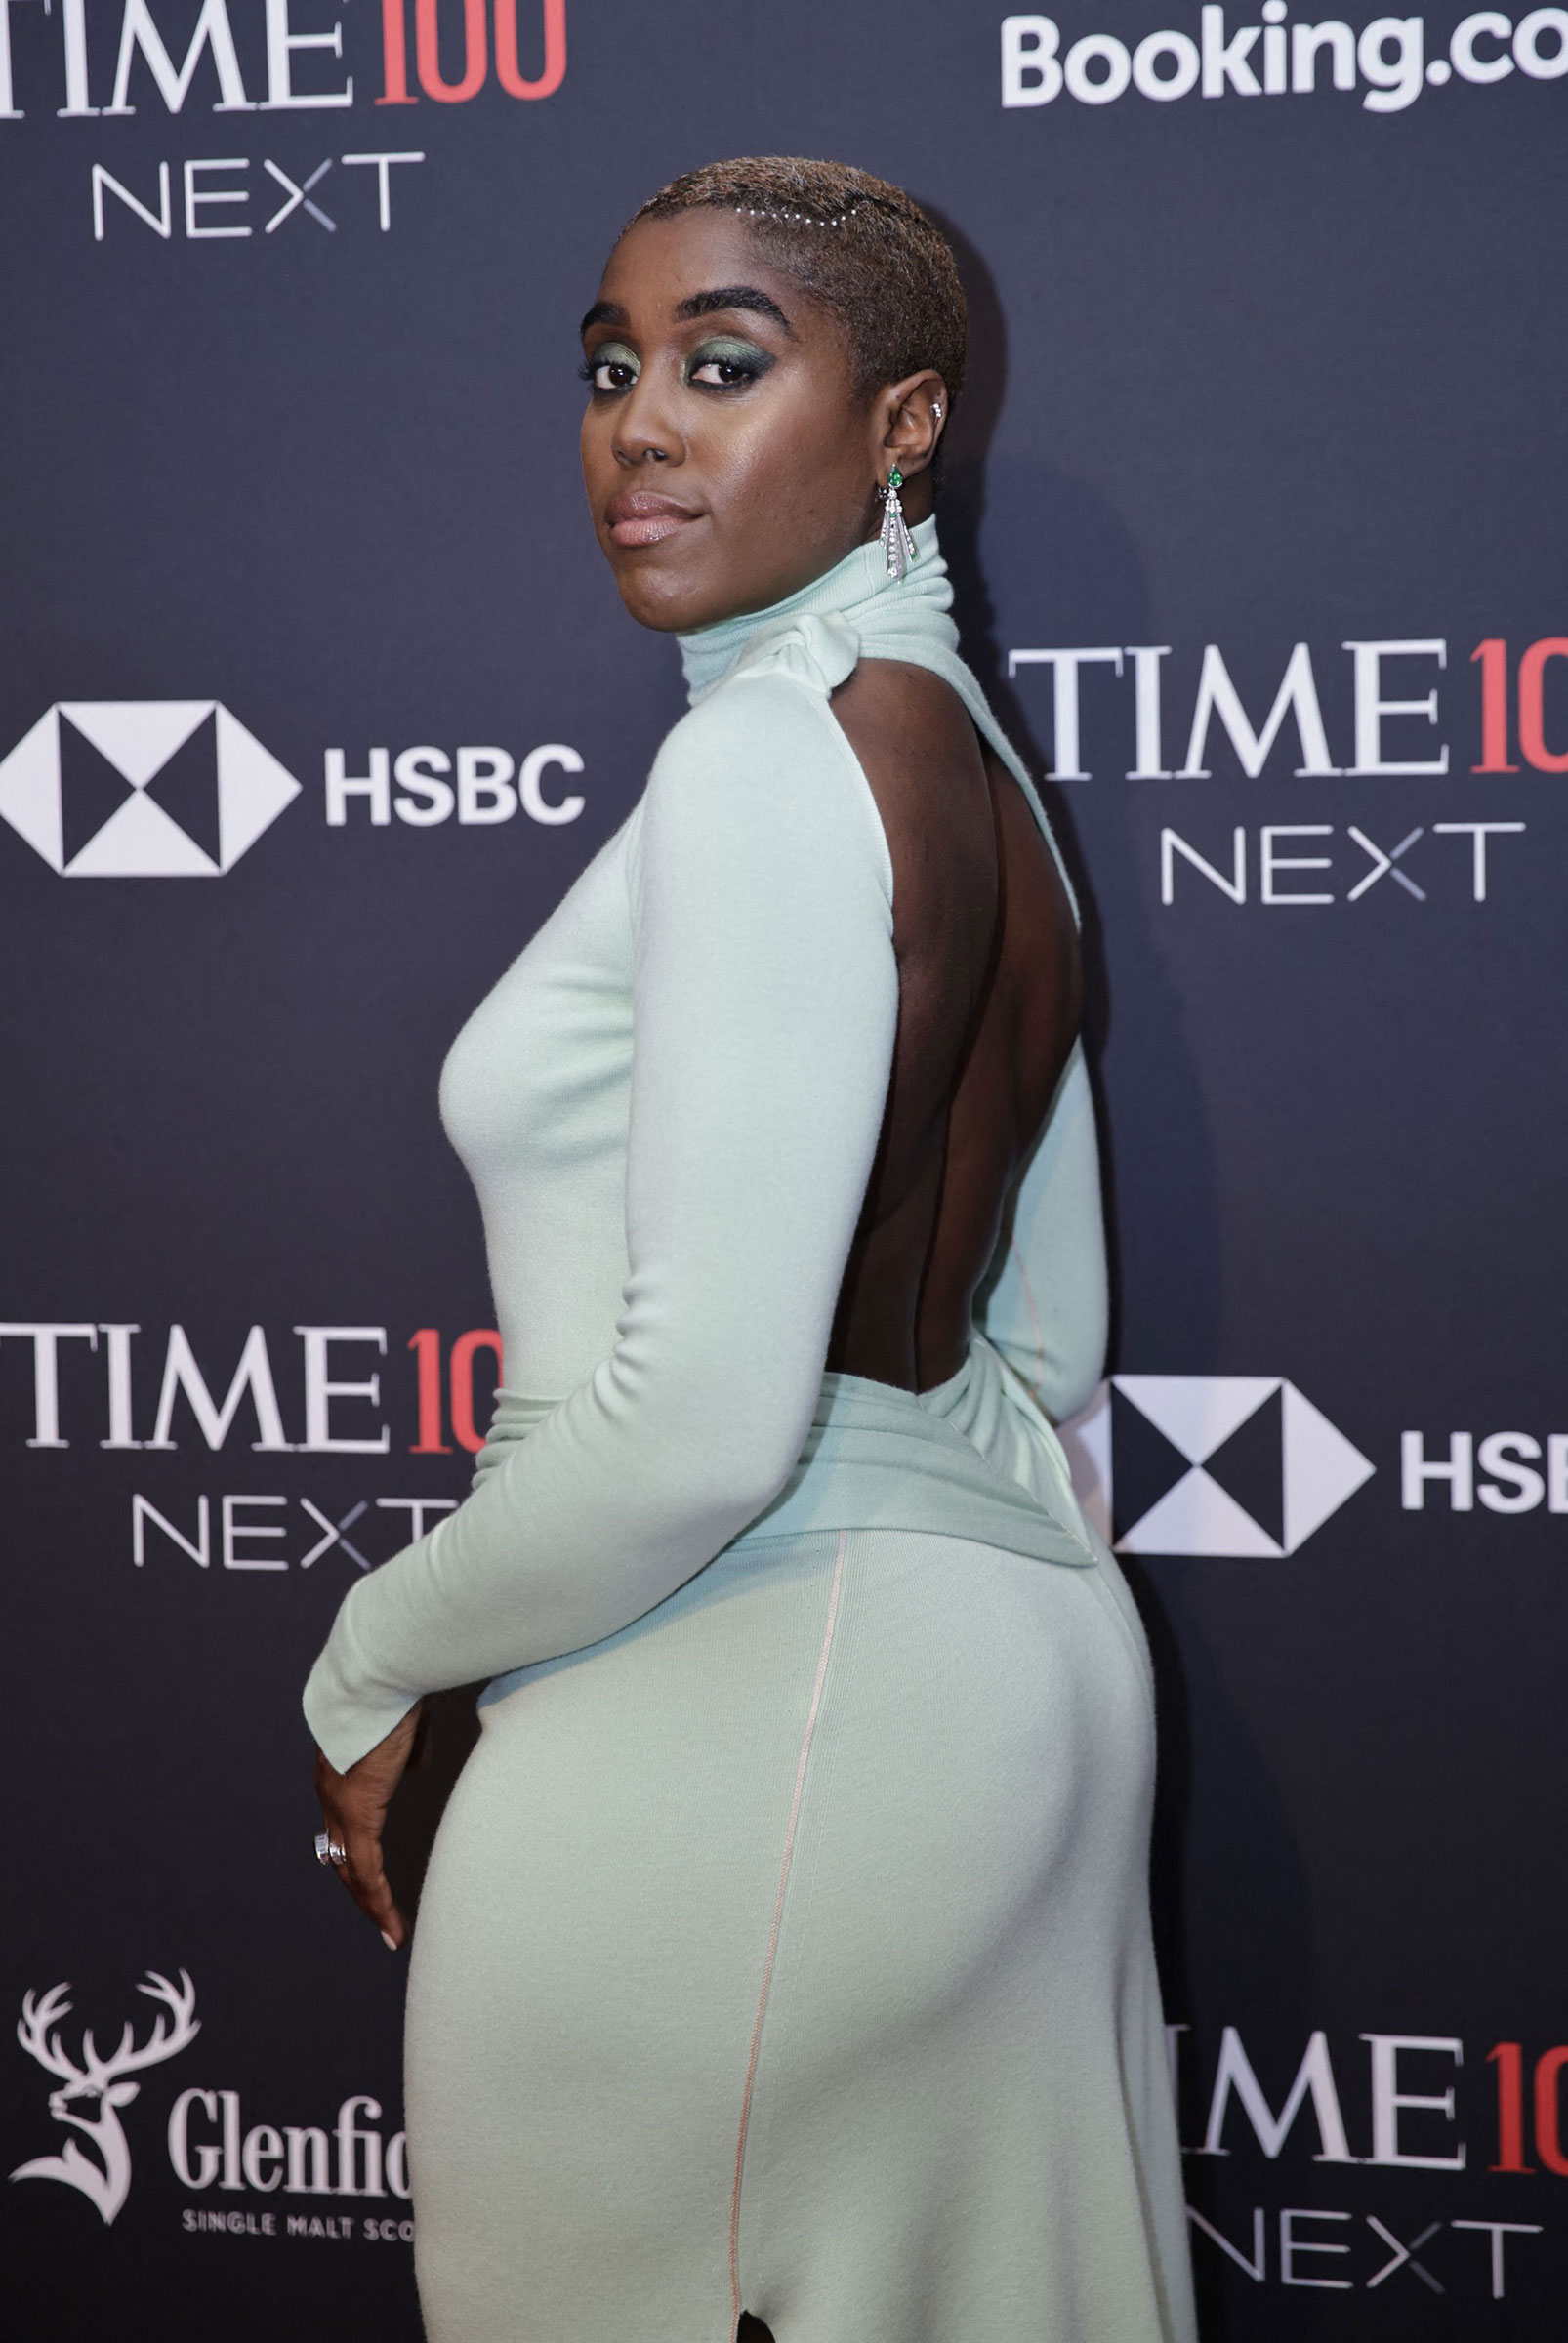 Actor Lashana Lynch attends the TIME100 Next Gala in New York City on Oct. 25, 2022. (Kena Betancur—AFP/Getty Images)